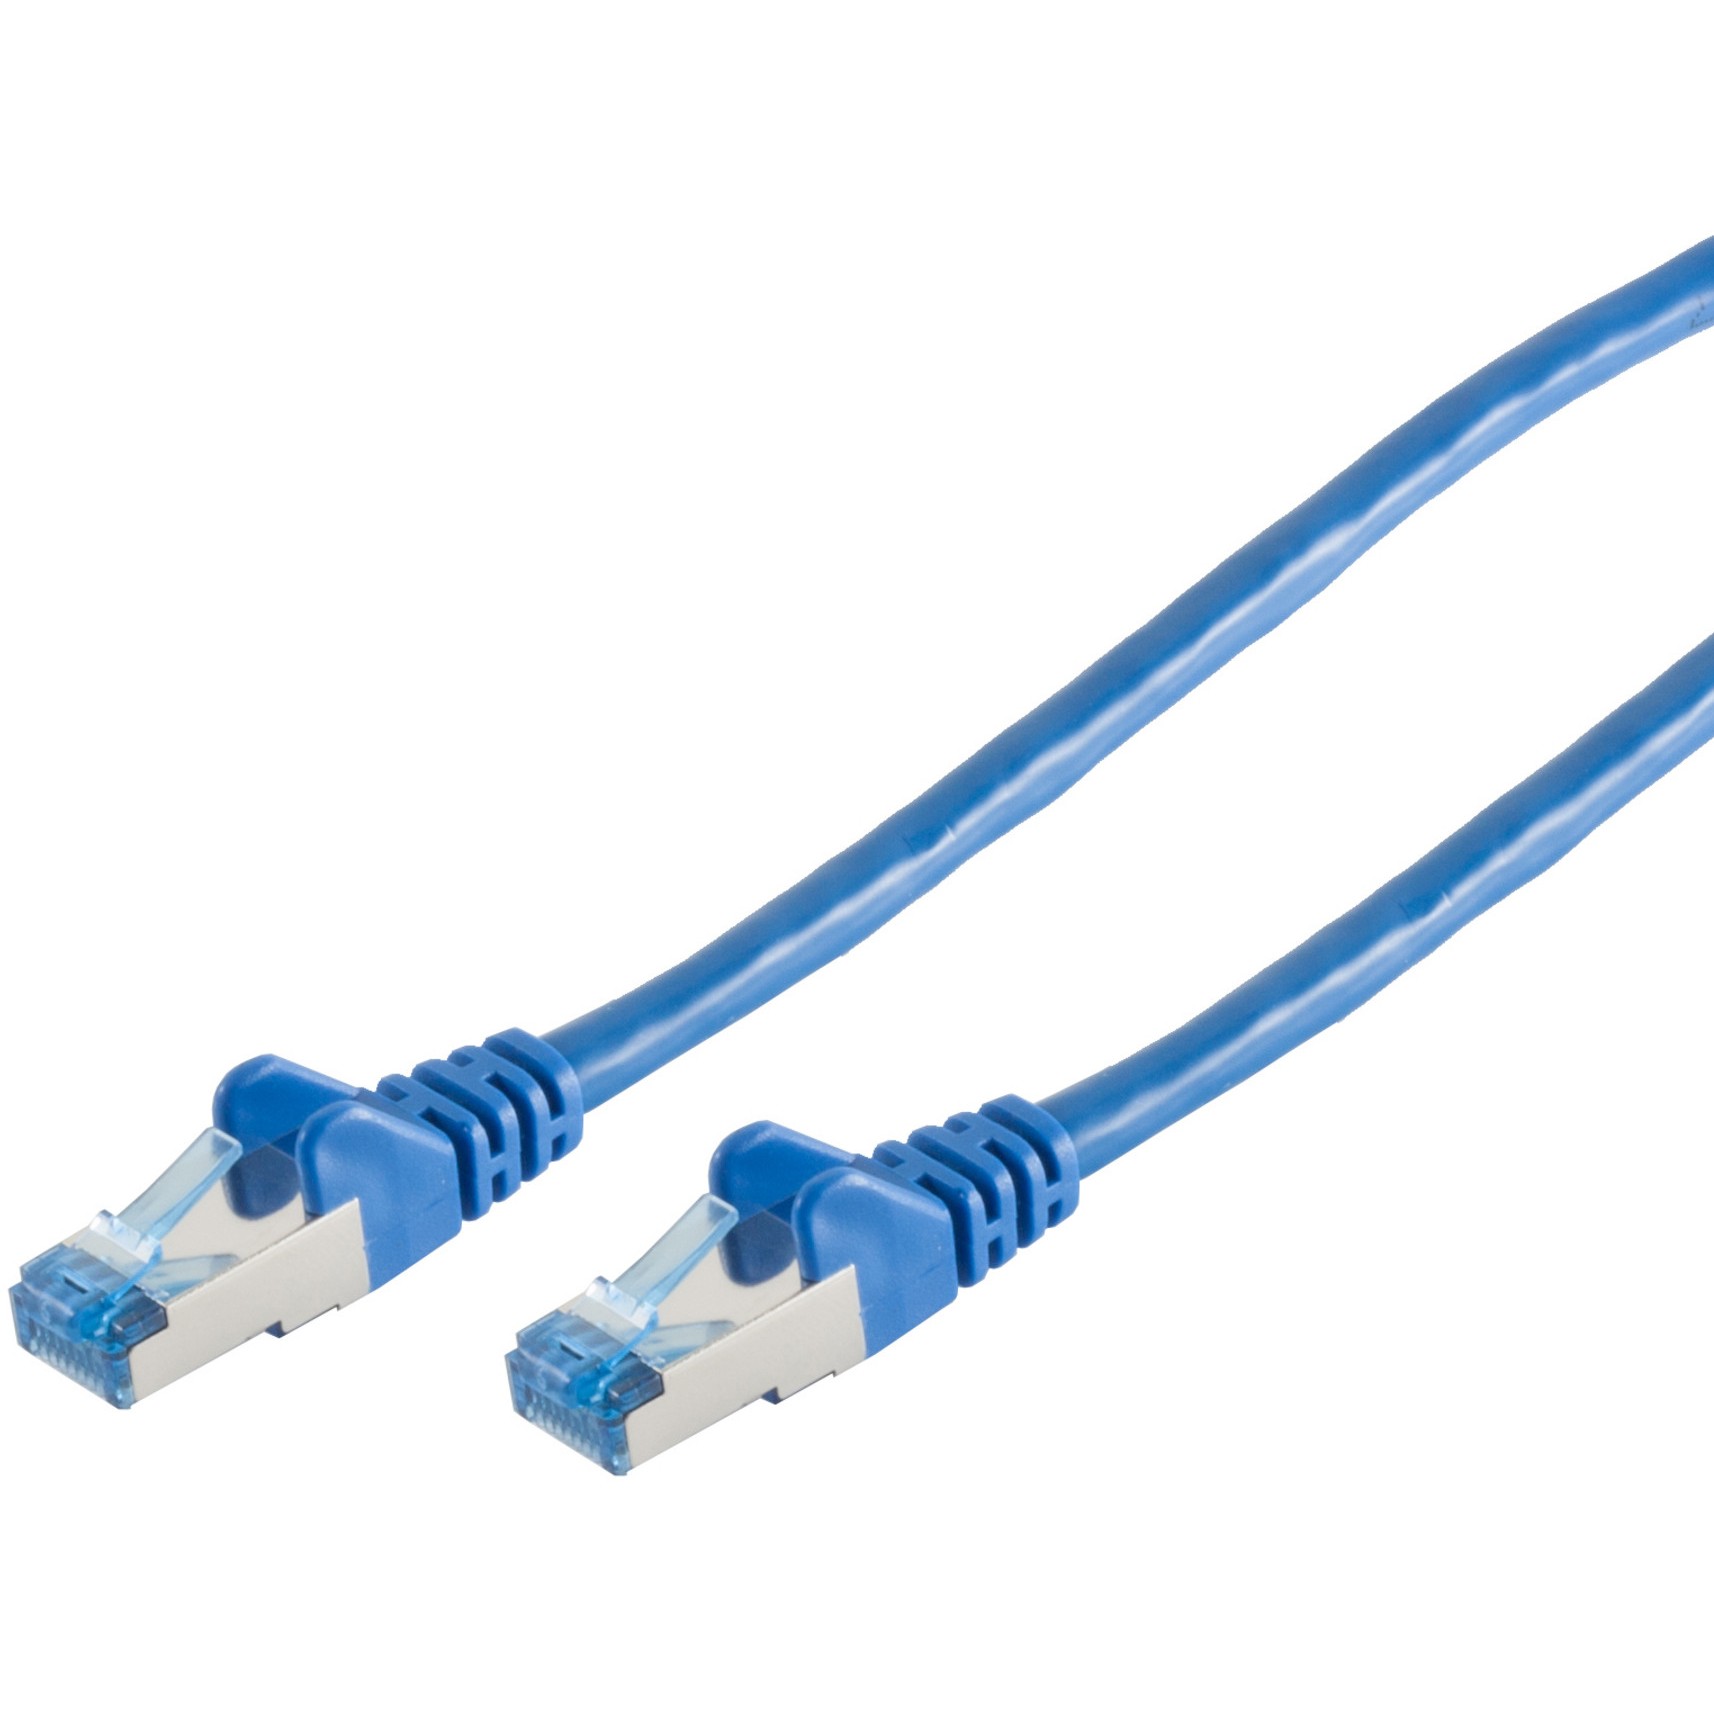 S-Conn 75715-B networking cable